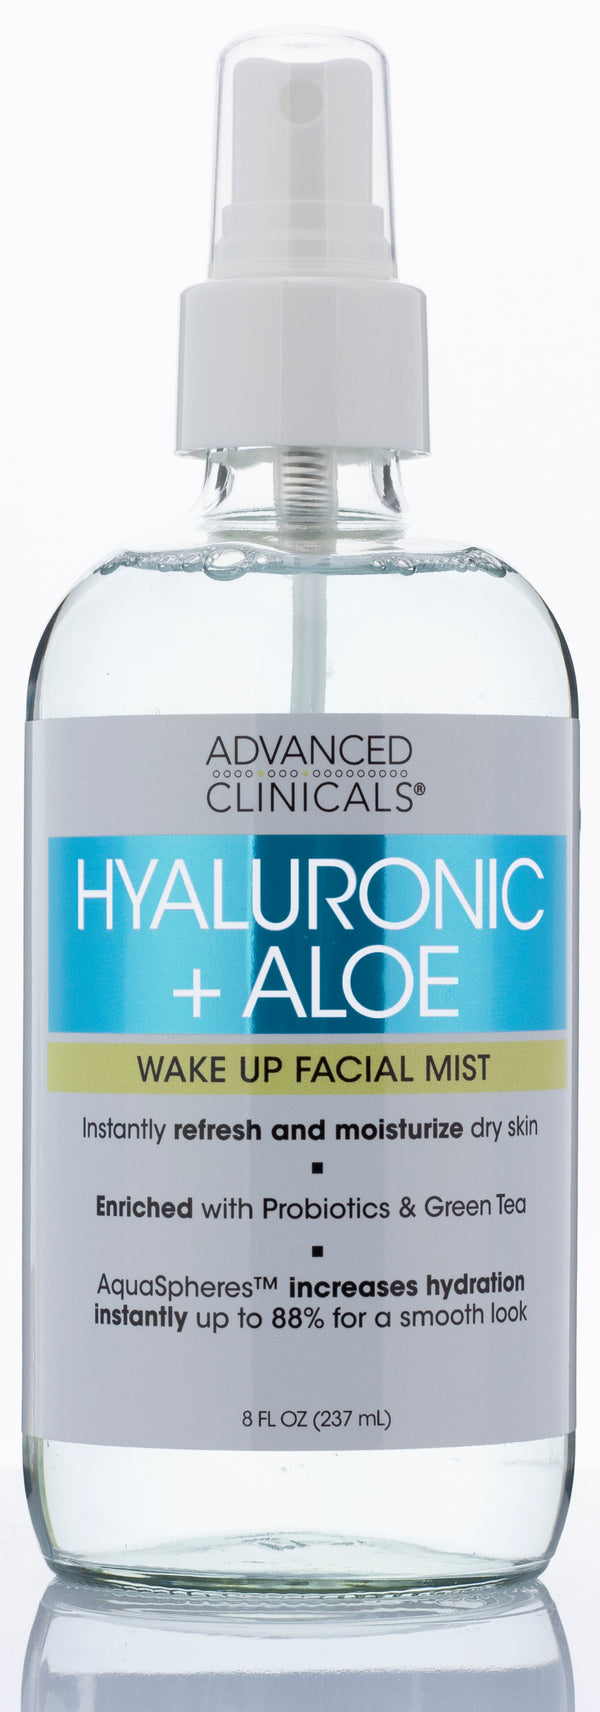 Advanced Clinicals Hyaluronic + Aloe Wake Up Facial Mist 8 Fl Oz